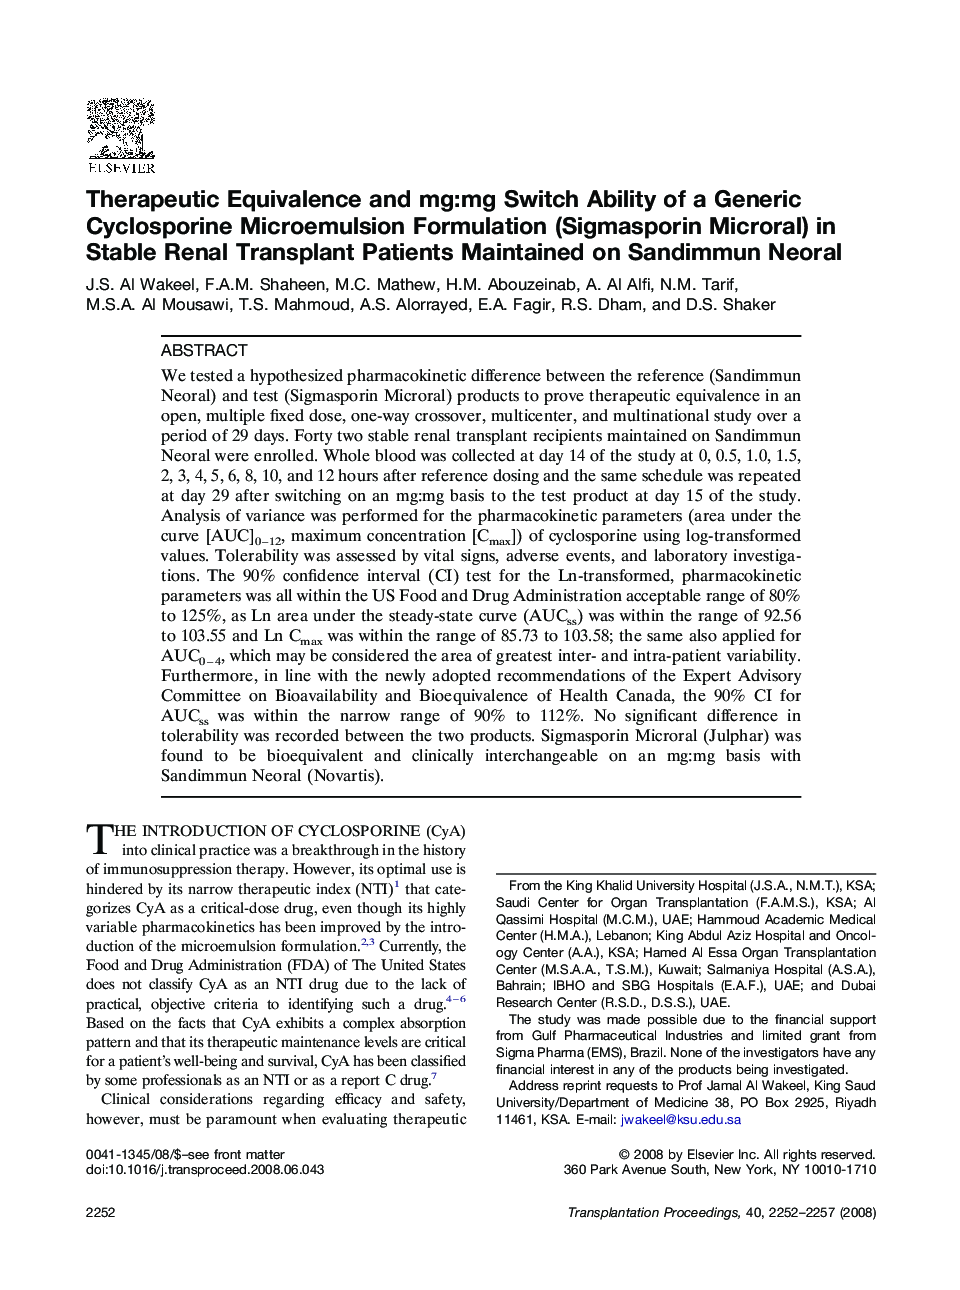 Therapeutic Equivalence and mg:mg Switch Ability of a Generic Cyclosporine Microemulsion Formulation (Sigmasporin Microral) in Stable Renal Transplant Patients Maintained on Sandimmun Neoral 